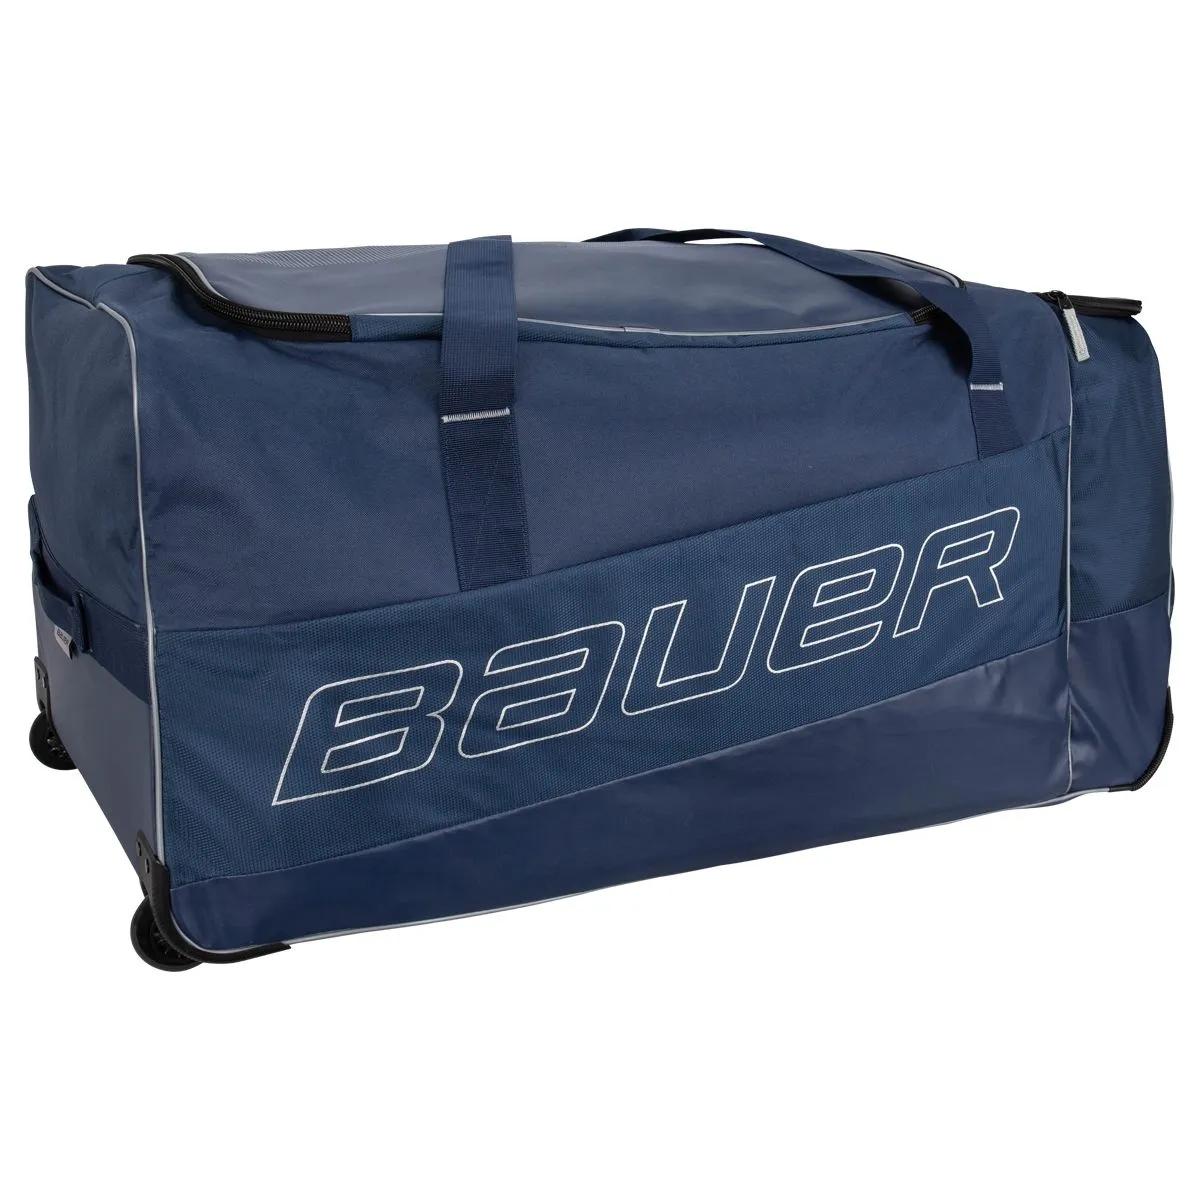 Ice Hockey & Figure Skating Gear | Free Delivery Over £95